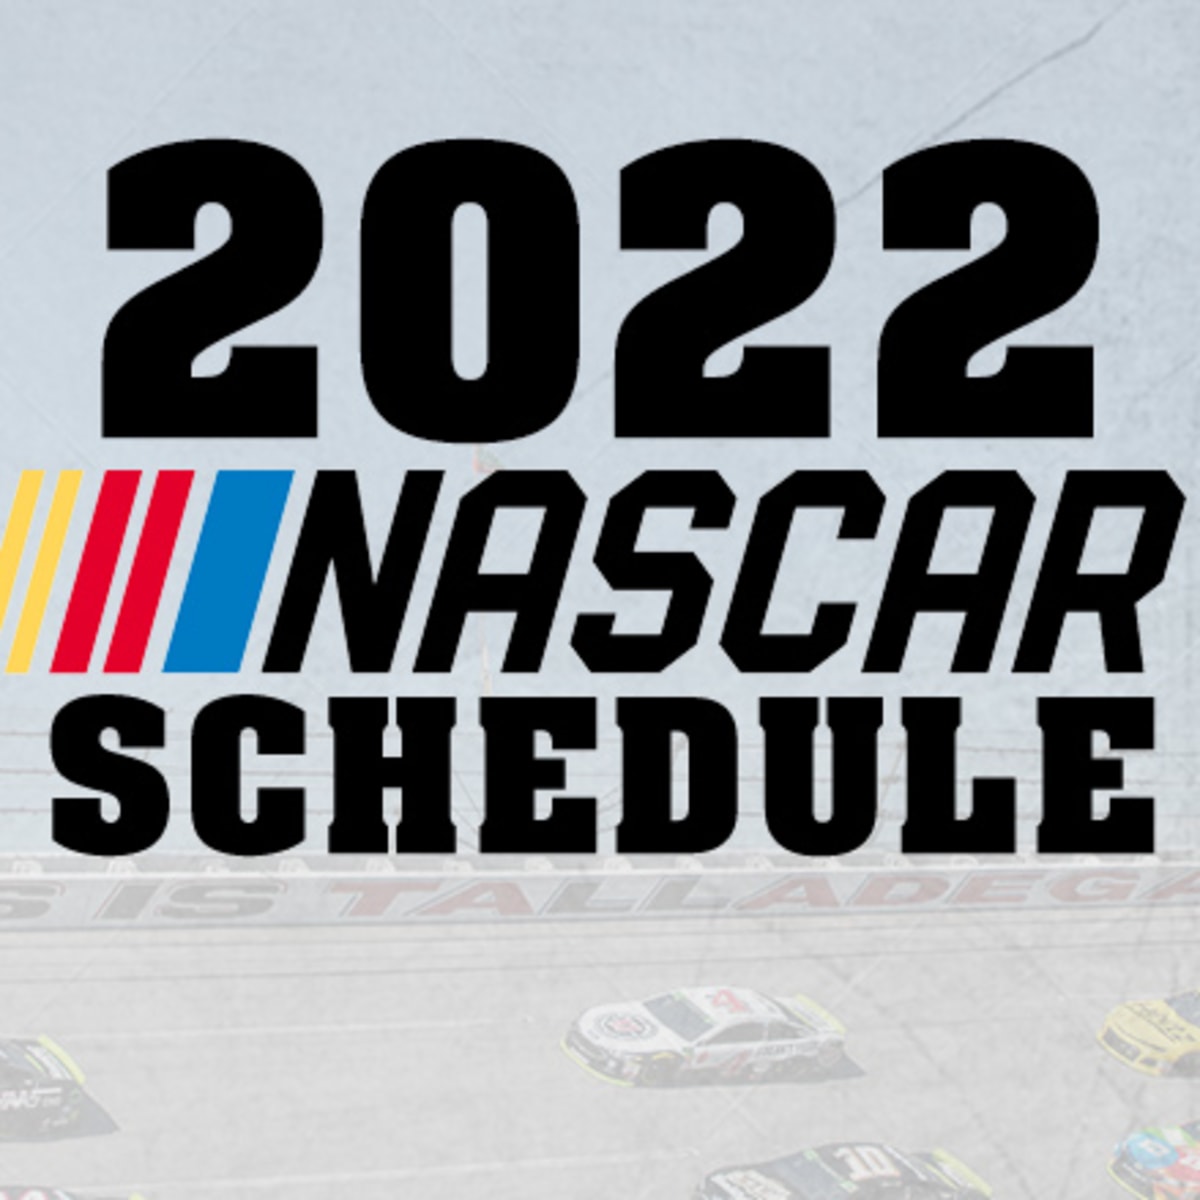 Nascar Broadcast Schedule 2022 2022 Nascar Schedule: Nascar Cup Series - Athlonsports.com | Expert  Predictions, Picks, And Previews